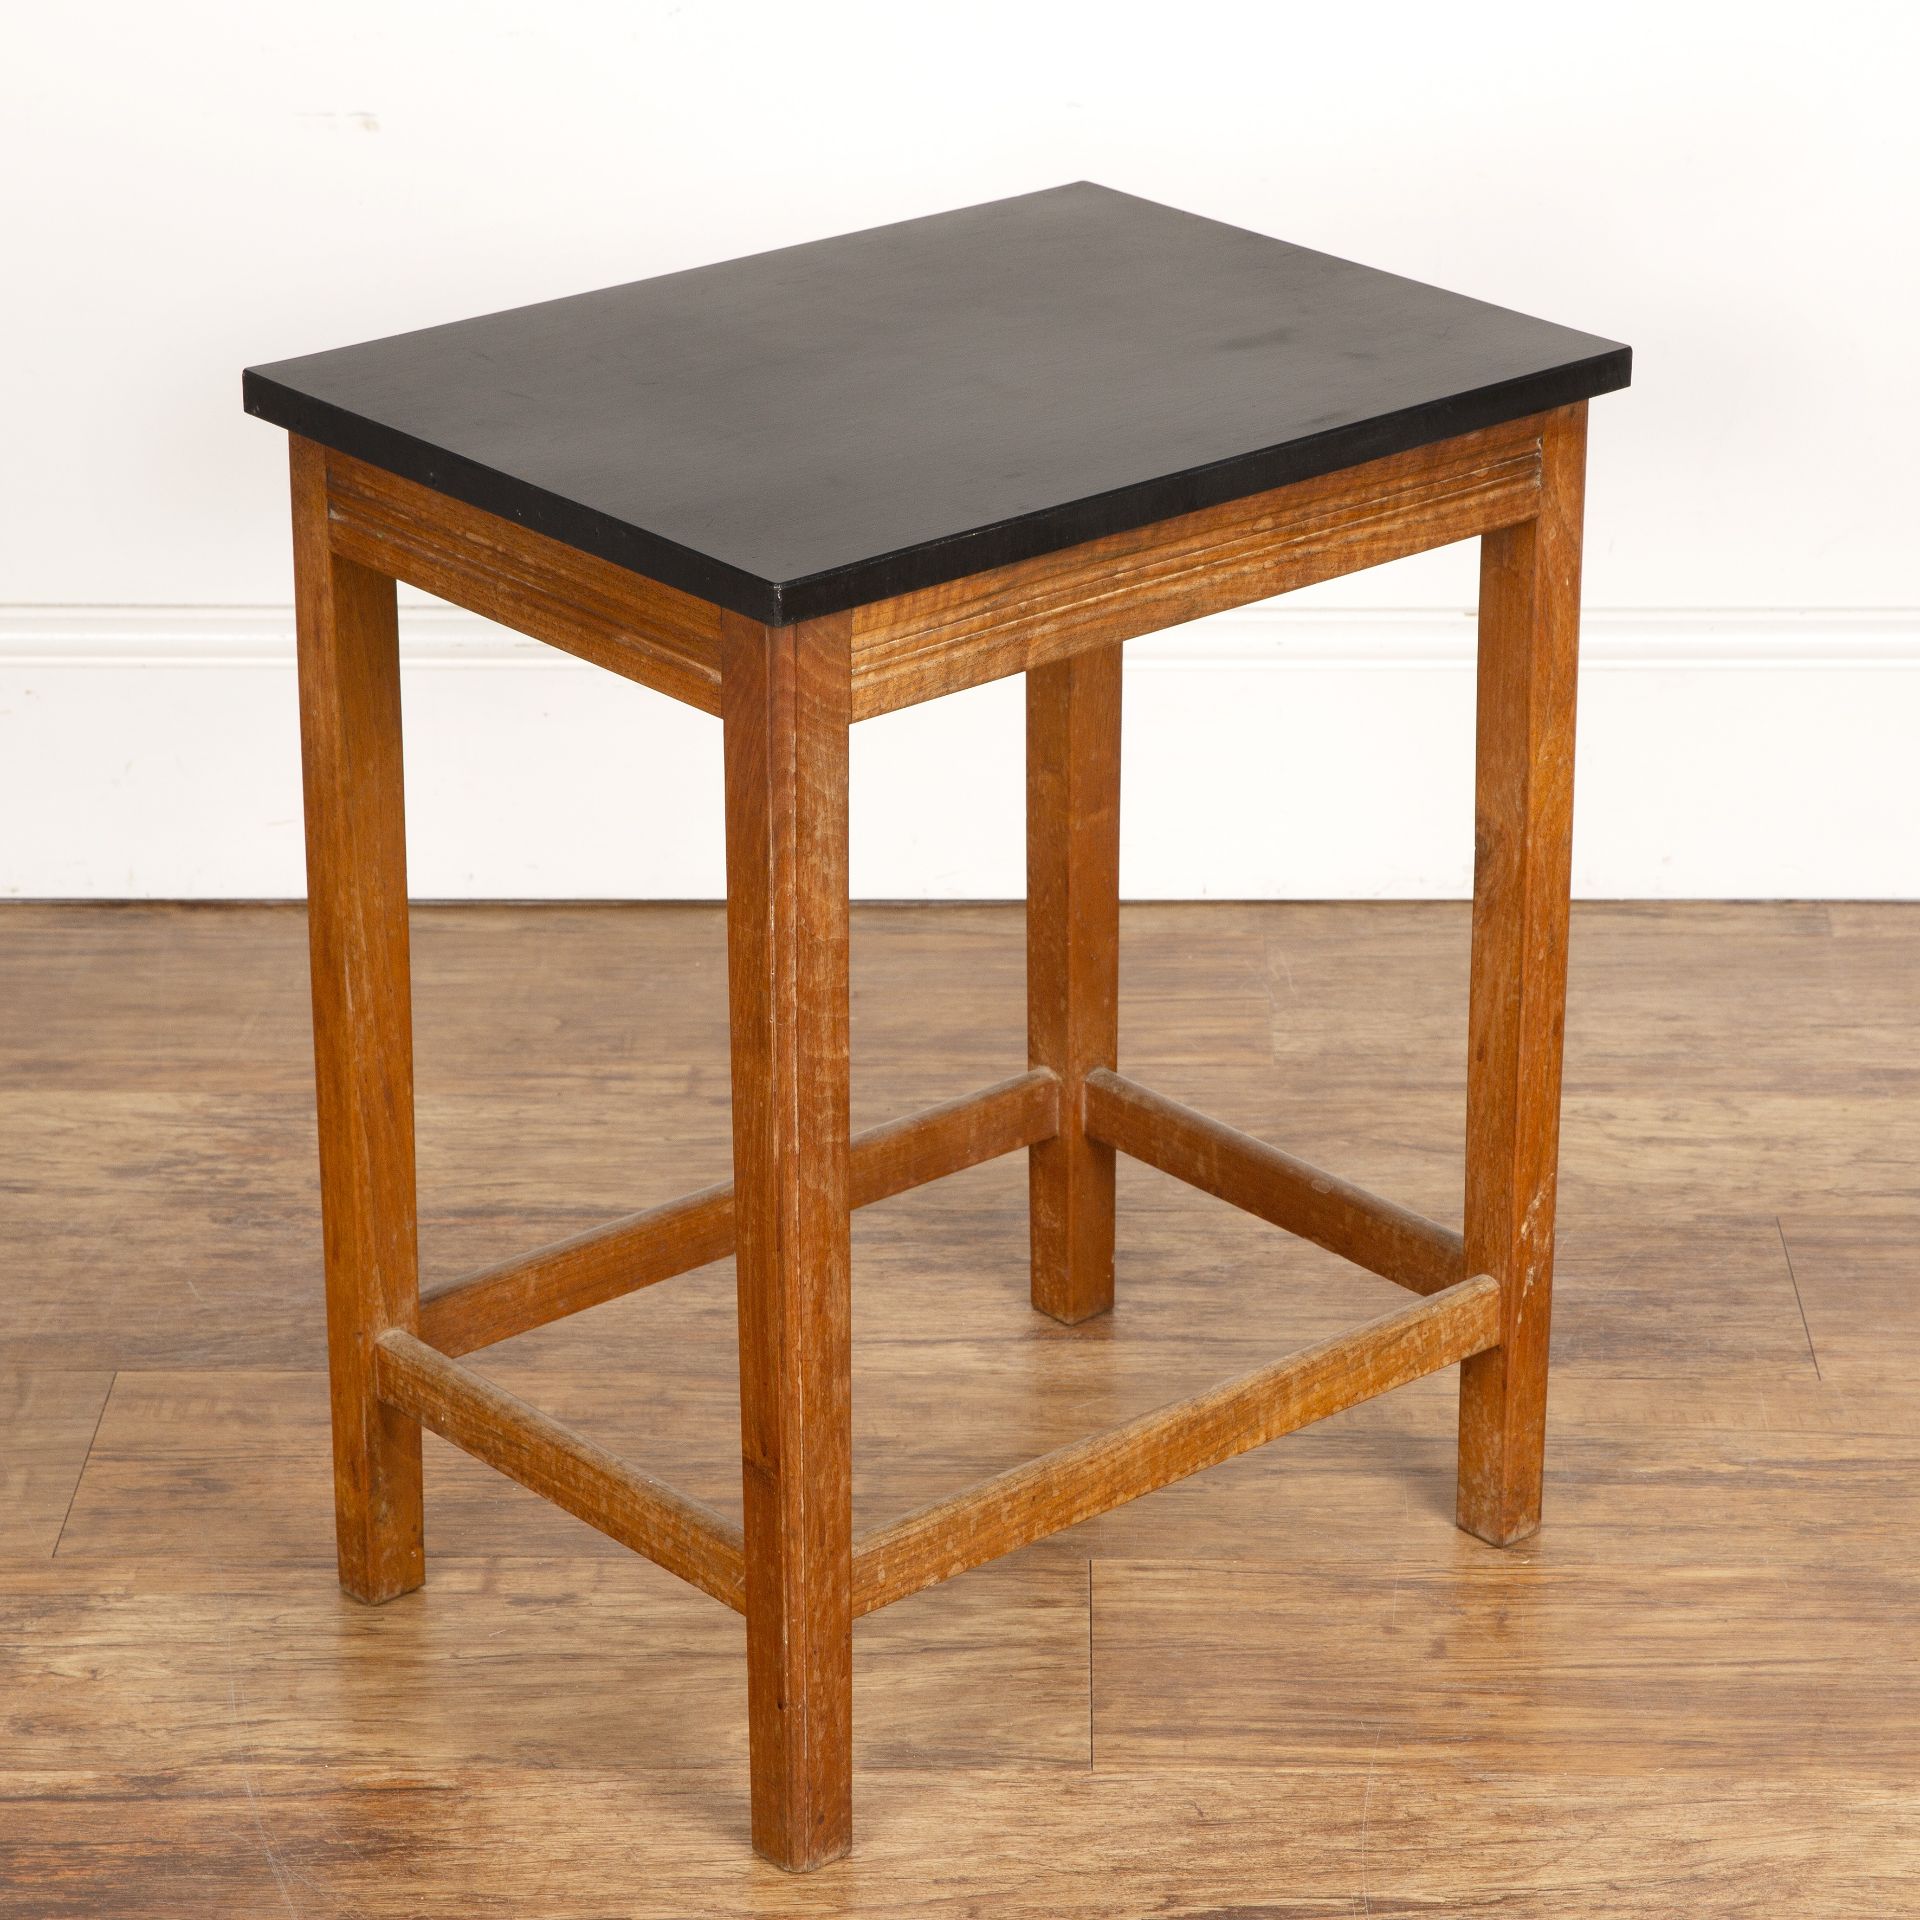 Gordon Russell (1892-1980) of Broadway oak framed table with black rectangular top, with copper